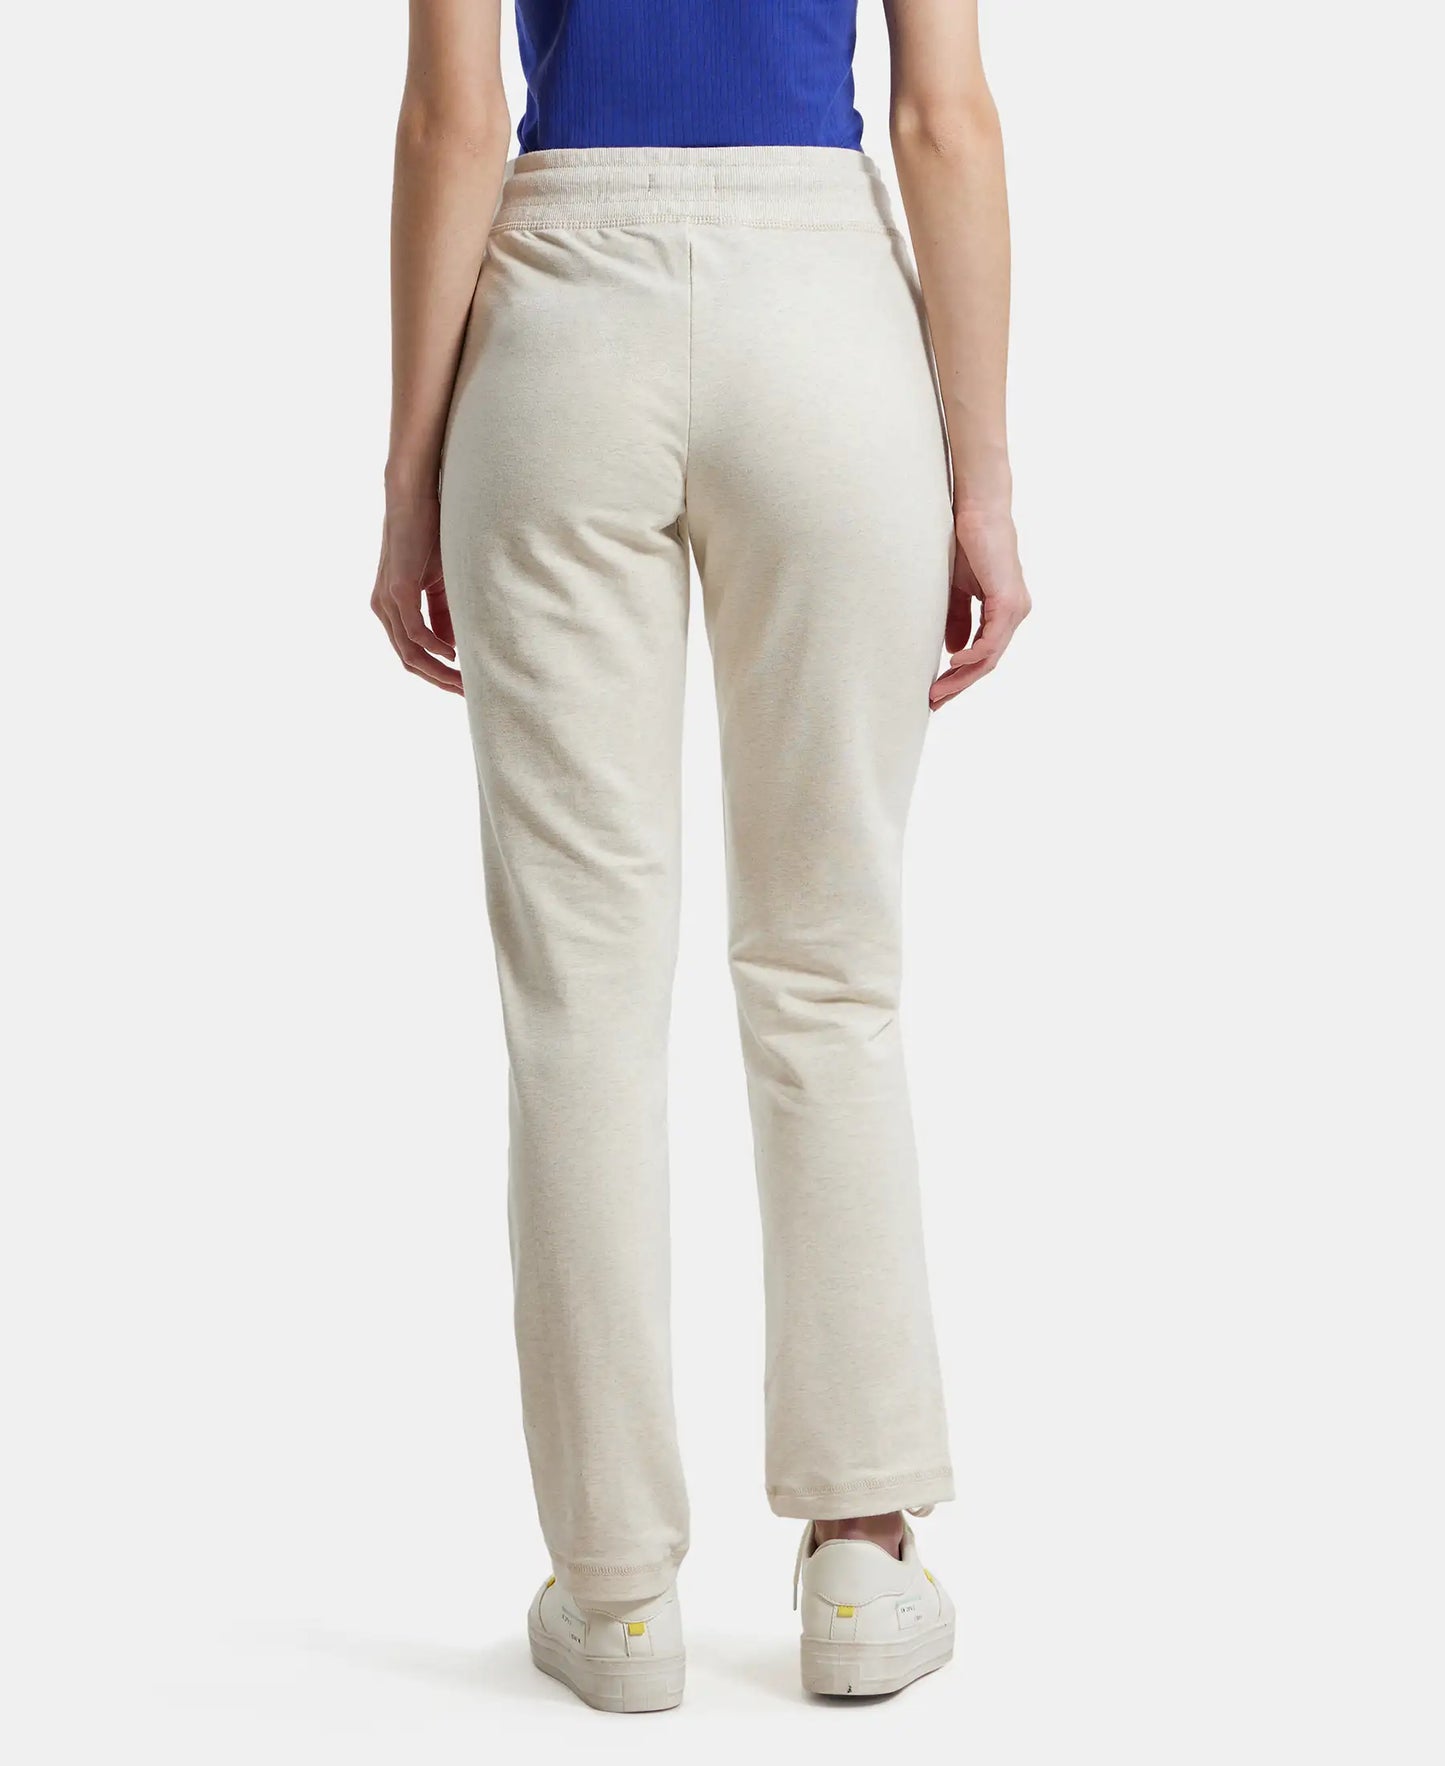 Super Combed Cotton French Terry Track Pant with Side Pockets - Cream Melange-3